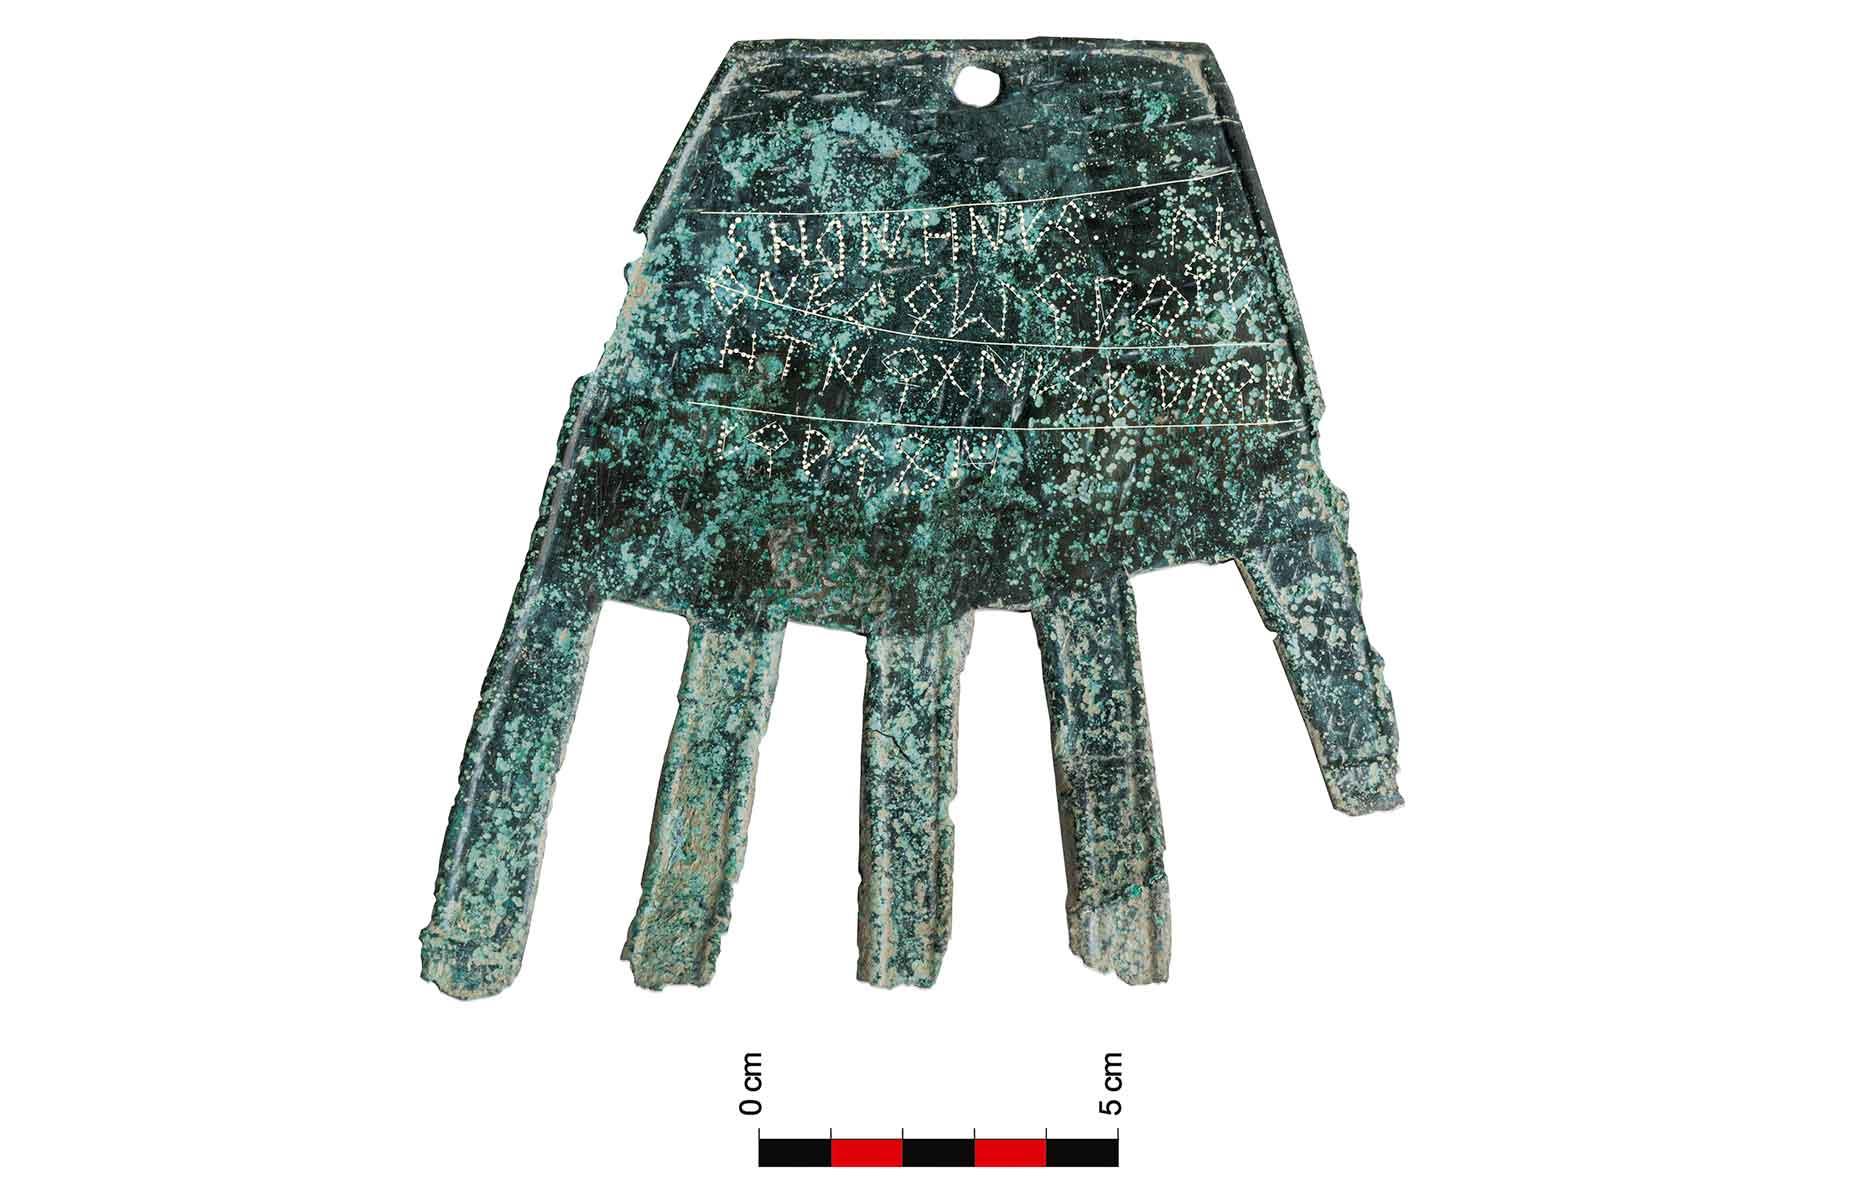 <p>In 2021, archaeologists unearthed <a href="https://news.artnet.com/art-world/hand-of-irulegi-earliest-basque-script-navarre-spain-2210963">this 2,100-year-old bronze relic</a> in Navarre, northern Spain. The Hand of Irulegi once belonged to the Vascones, a late-Iron Age tribe, and was most likely hung over a door for good luck. During its restoration in 2022, a four-line inscription was found etched into the hand – the words are now believed to be the earliest ever written in the Basque language. Before the discovery, it was thought the Vascones were mostly illiterate.</p>